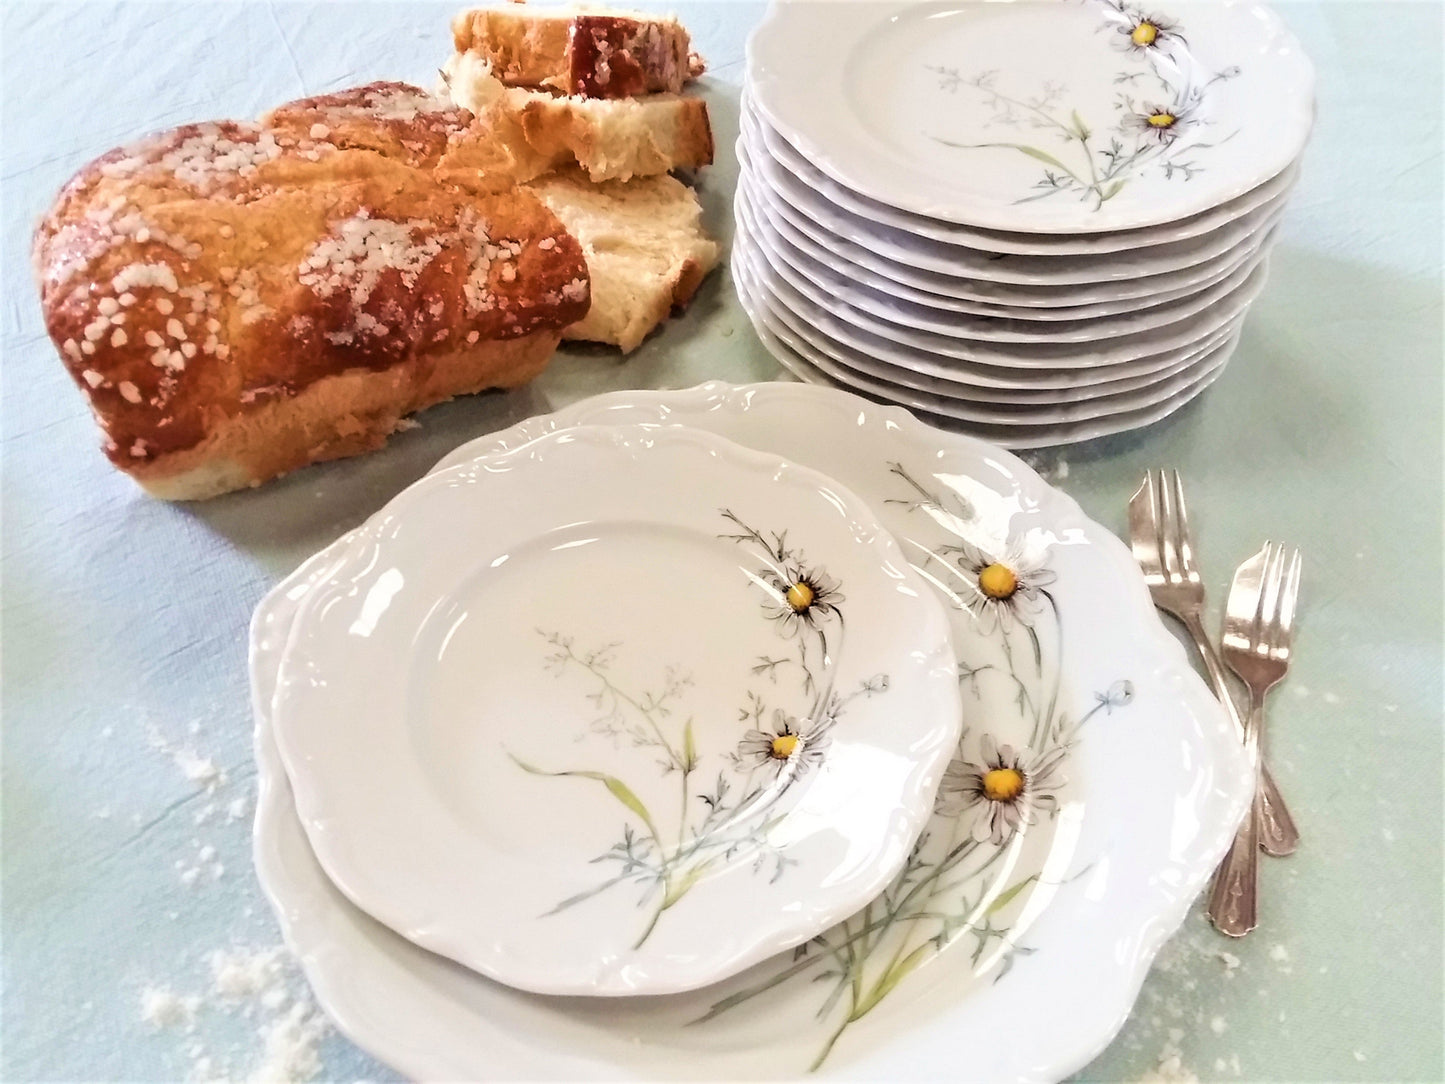 TEN "Daisy" Tea Plates & Platter by "Winterling Roslau, Bavaria." from Tiggy & Pip - €180.00! Shop now at Tiggy and Pip